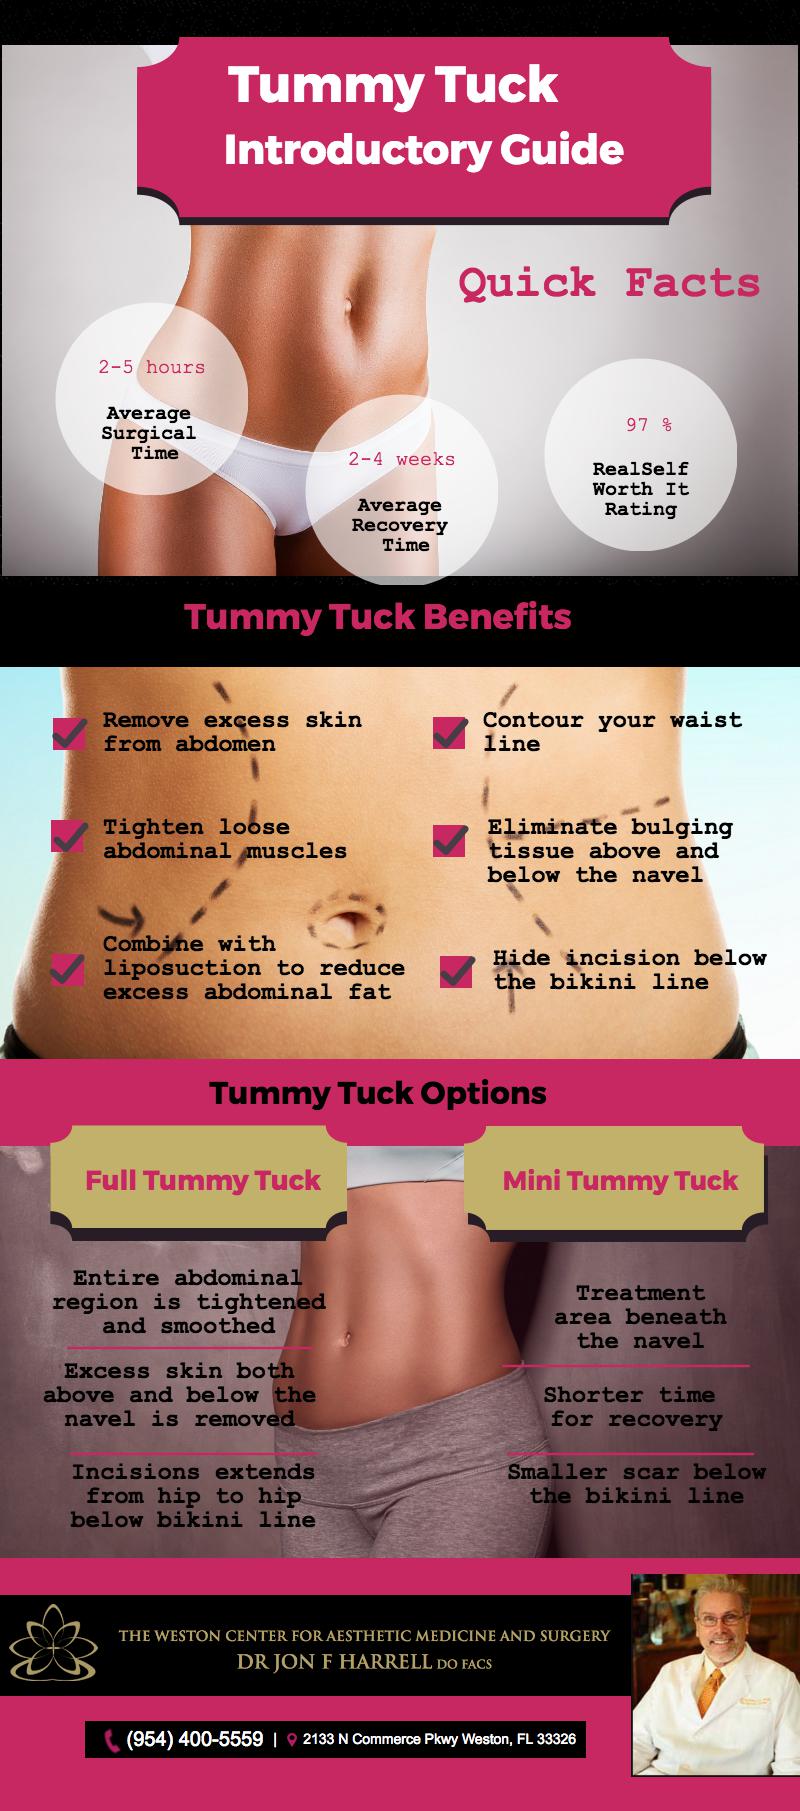 5 Pretty Great Perks of Nonsurgical Body Contouring [Infographic]